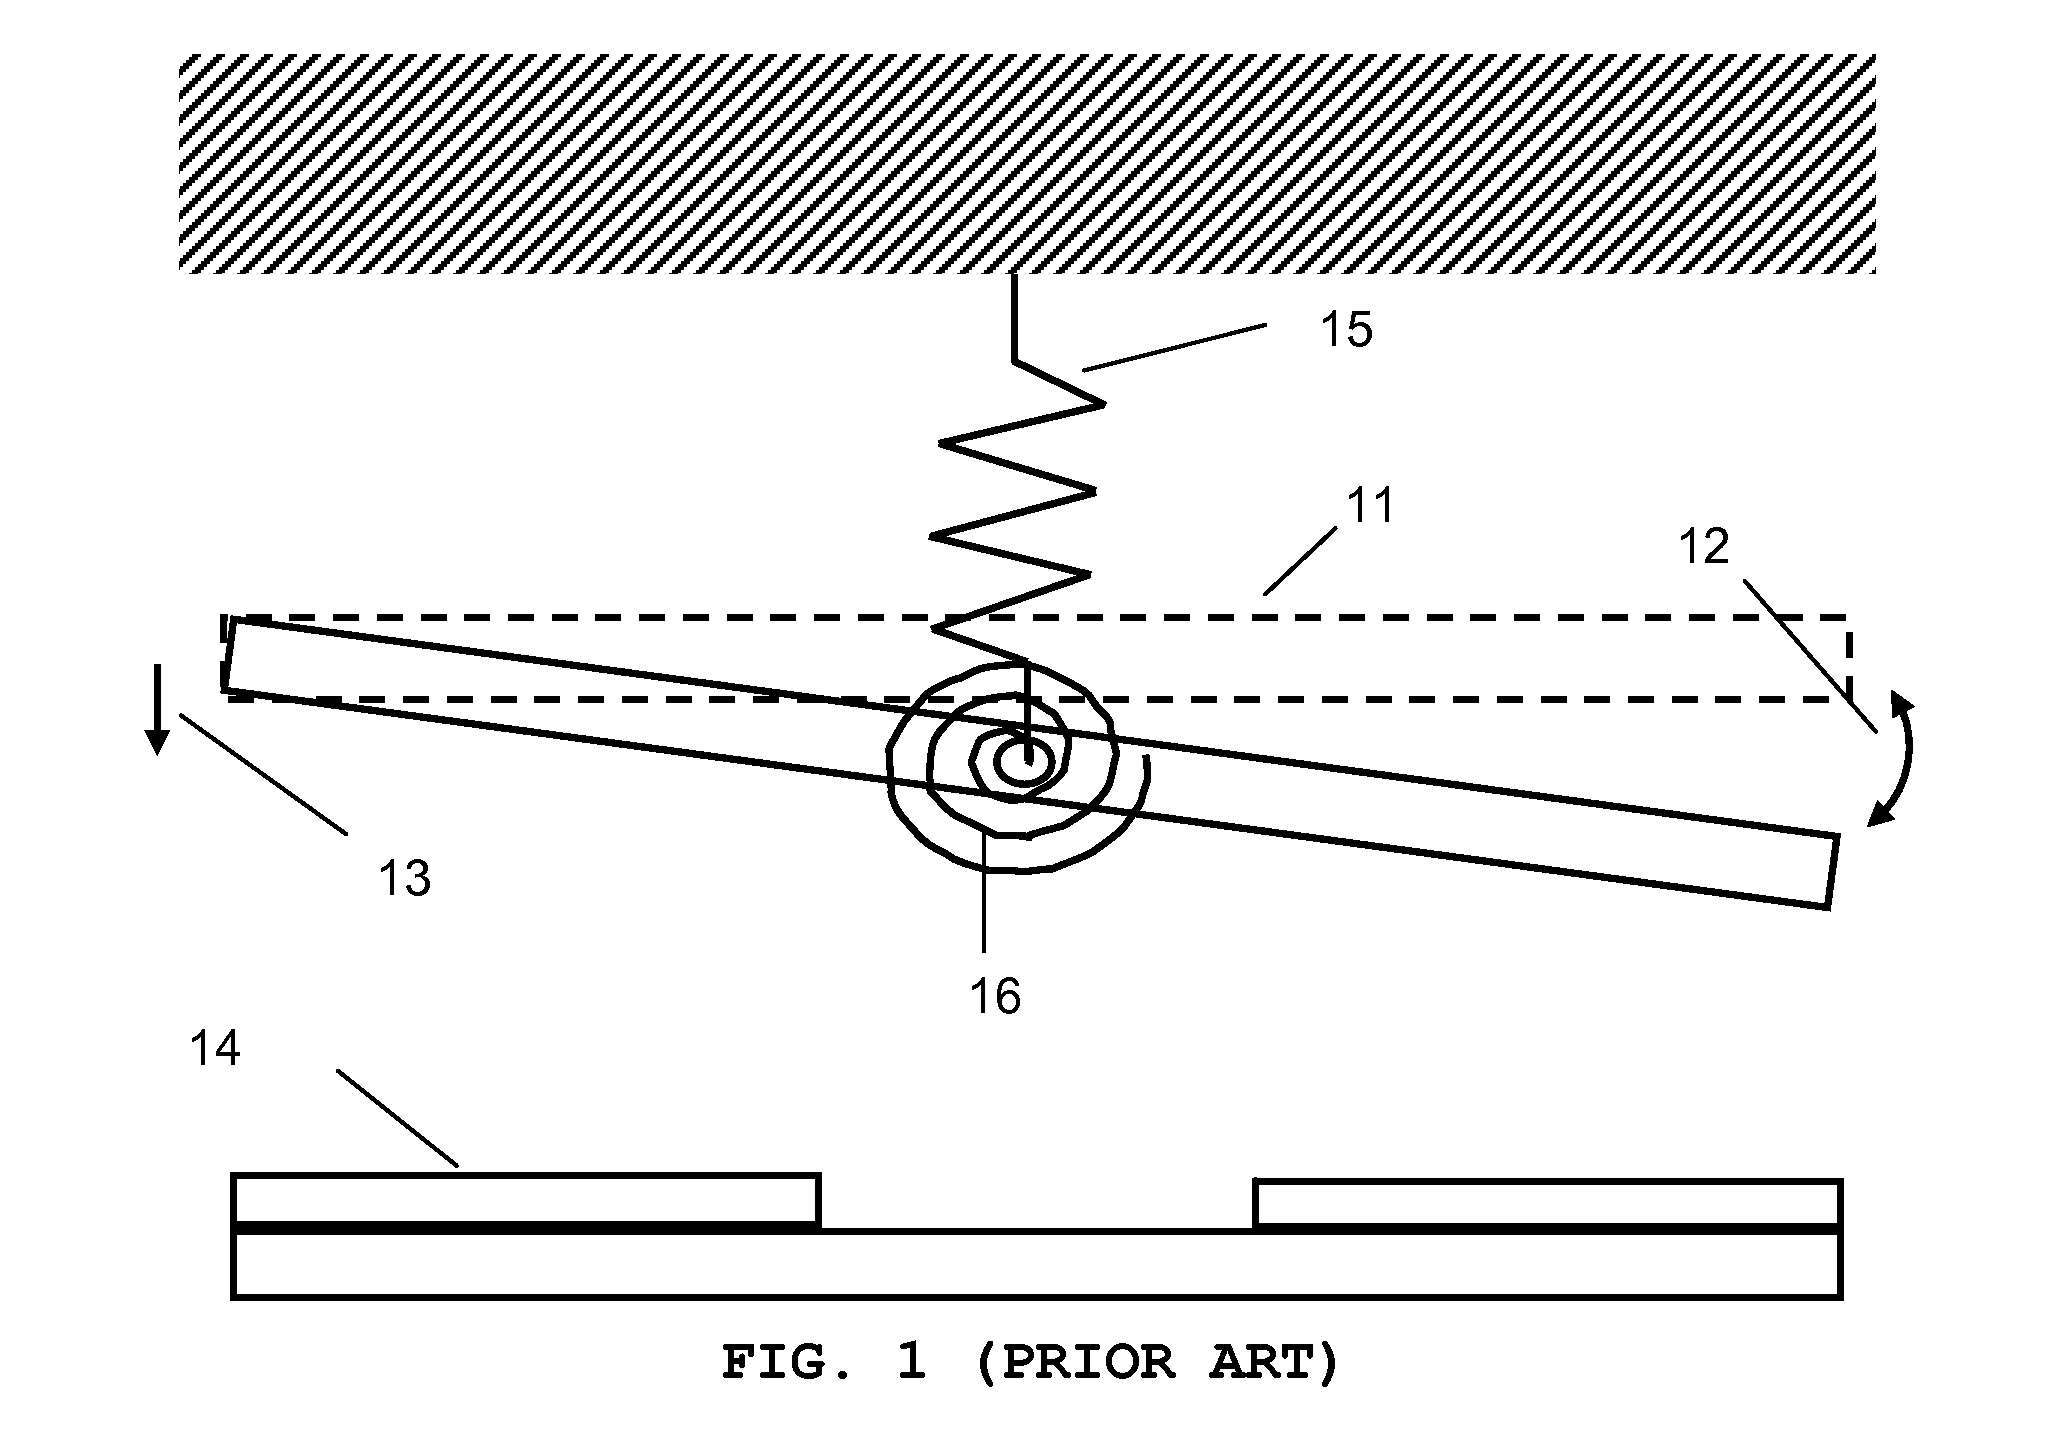 Discretely controlled micromirror device having multiple motions